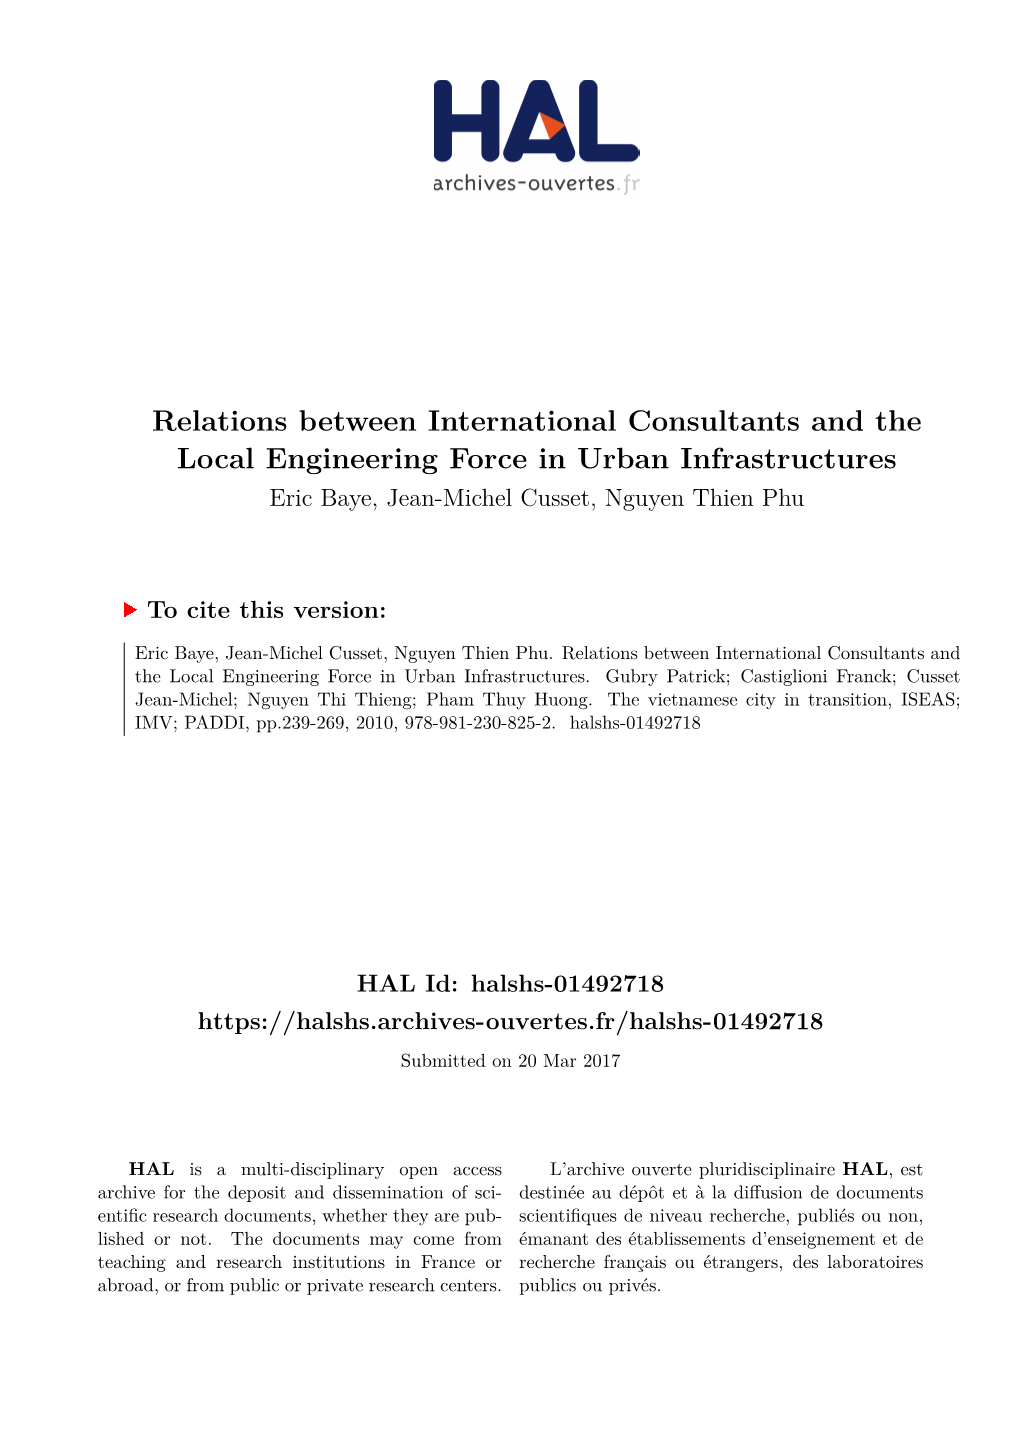 Relations Between International Consultants and the Local Engineering Force in Urban Infrastructures Eric Baye, Jean-Michel Cusset, Nguyen Thien Phu